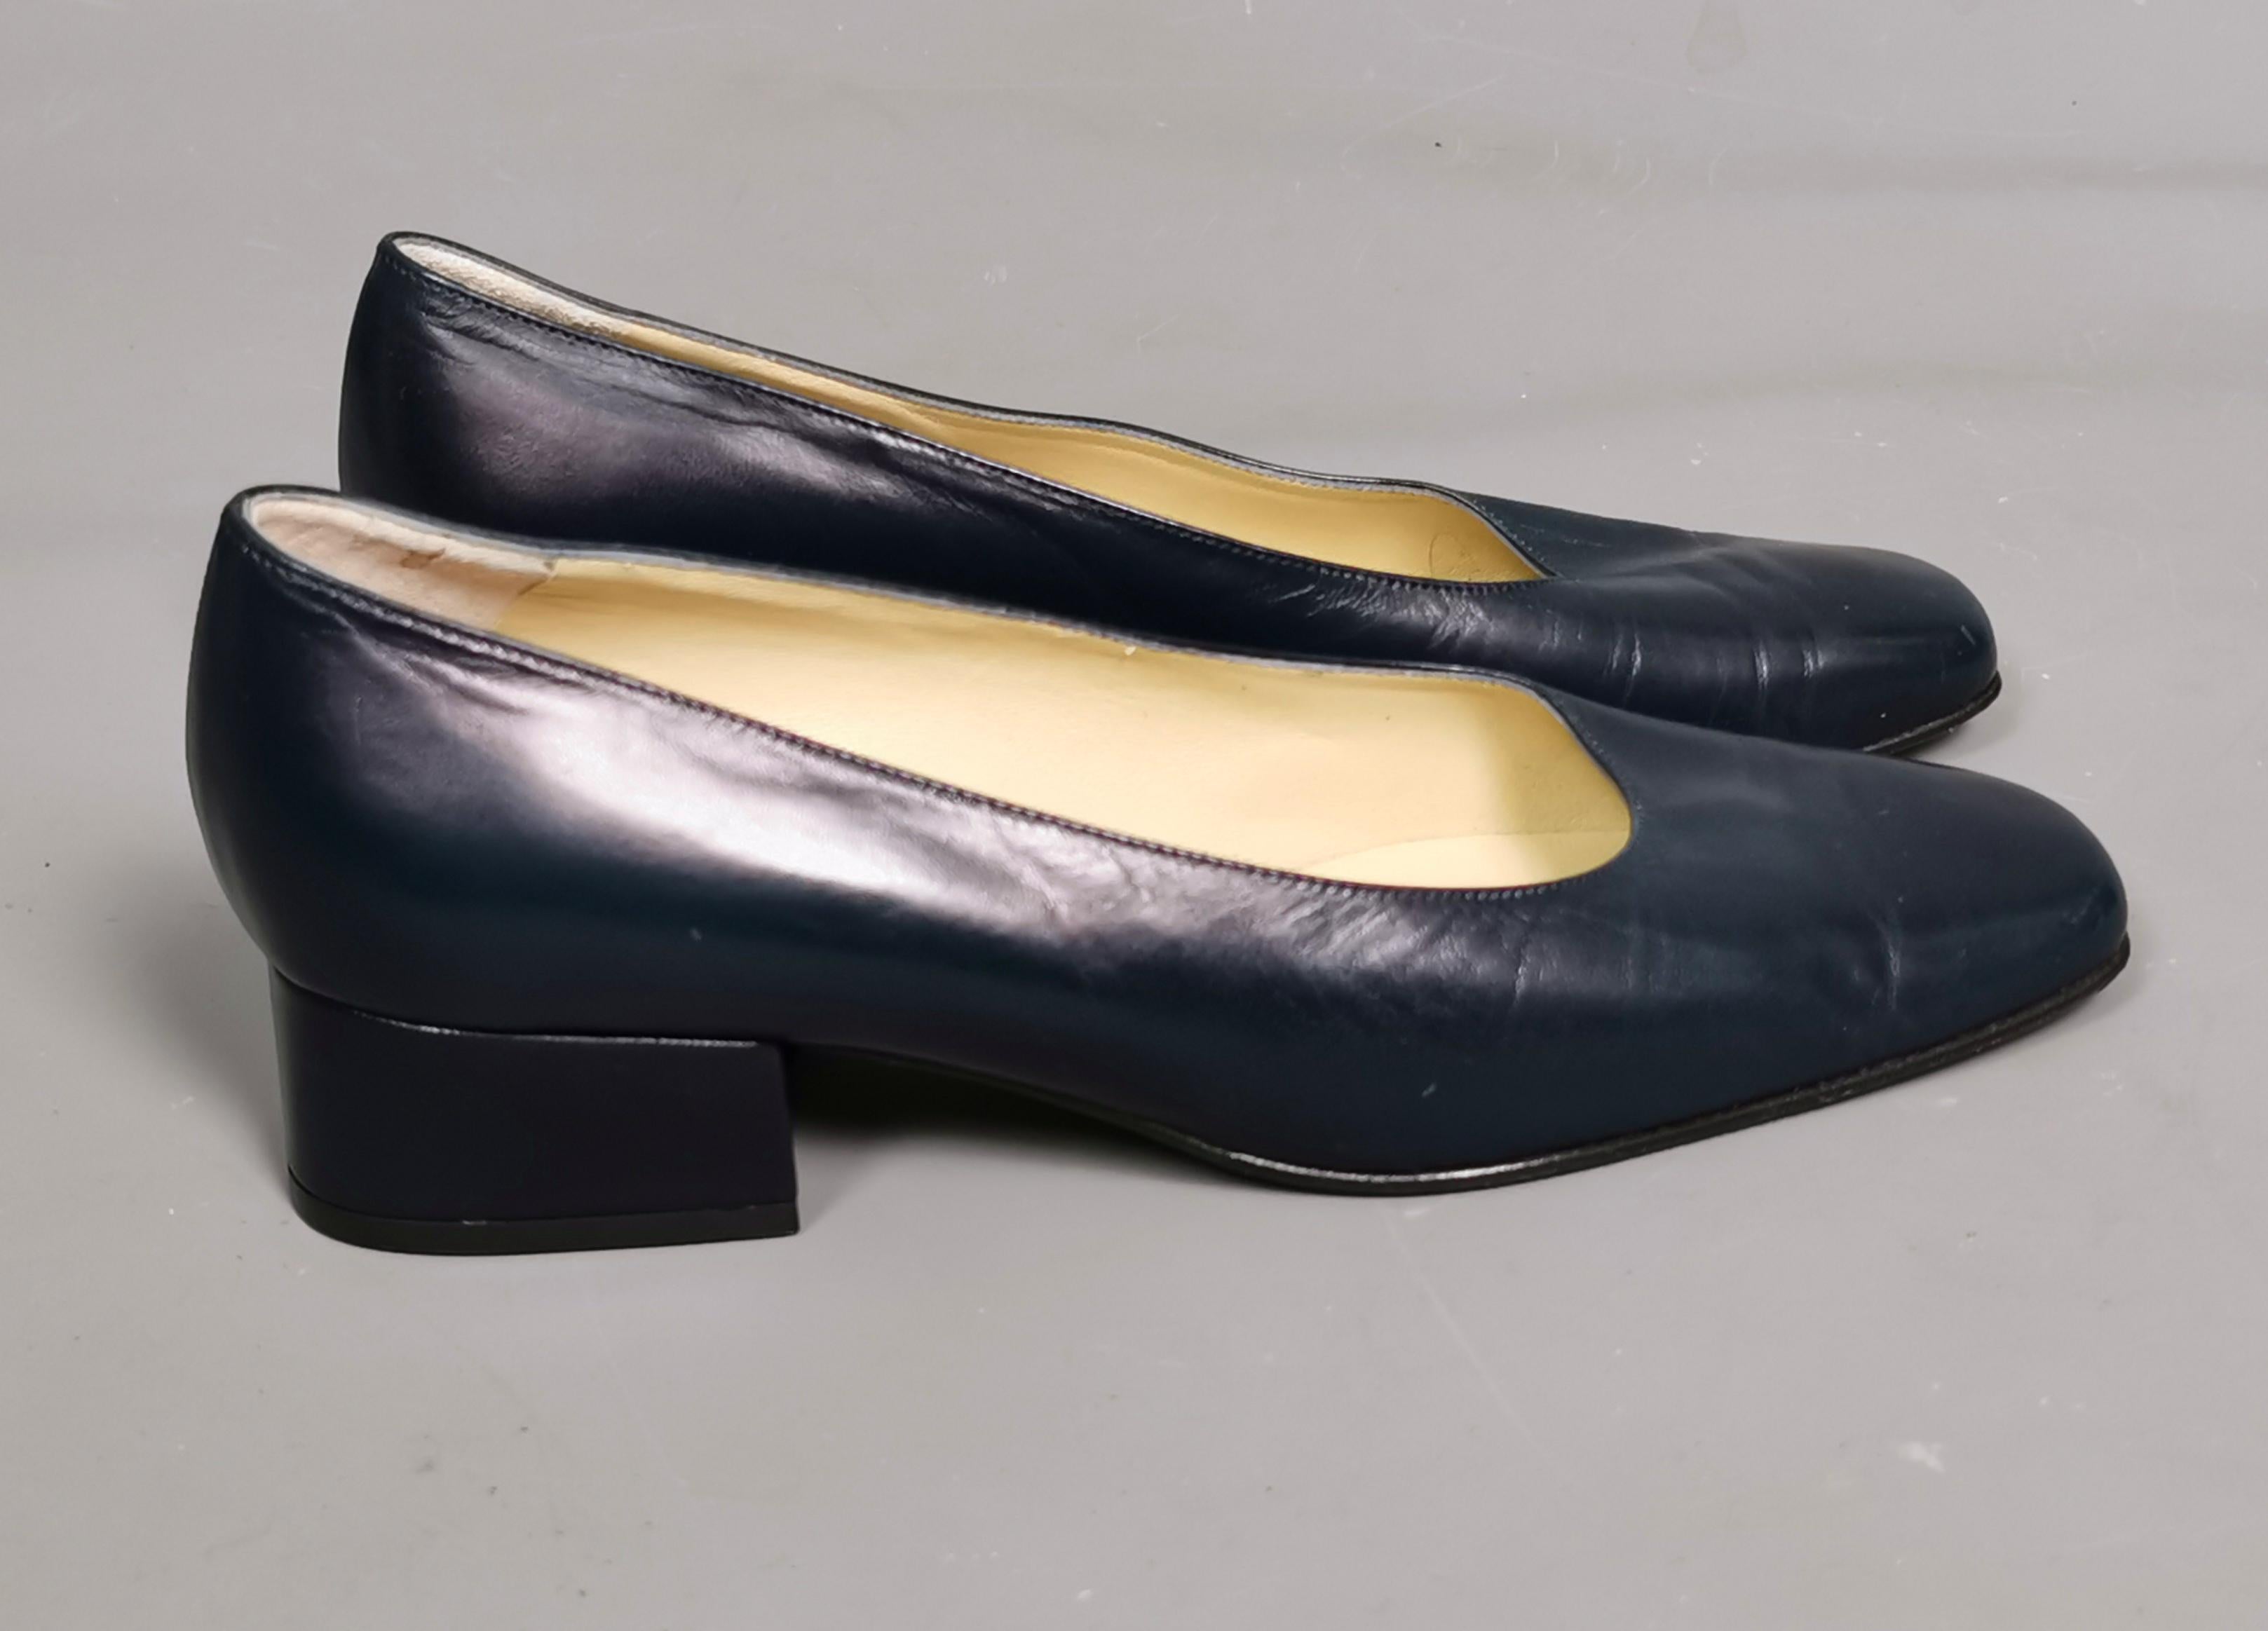 A classic and versatile pair of vintage ladies navy blue leather court shoes.

They are a dark navy blue with a low / mid block heel and a slightly squared toe.

Labelled inside and to the sole for Bally.

They are a marked as a ladies UK size 4.5